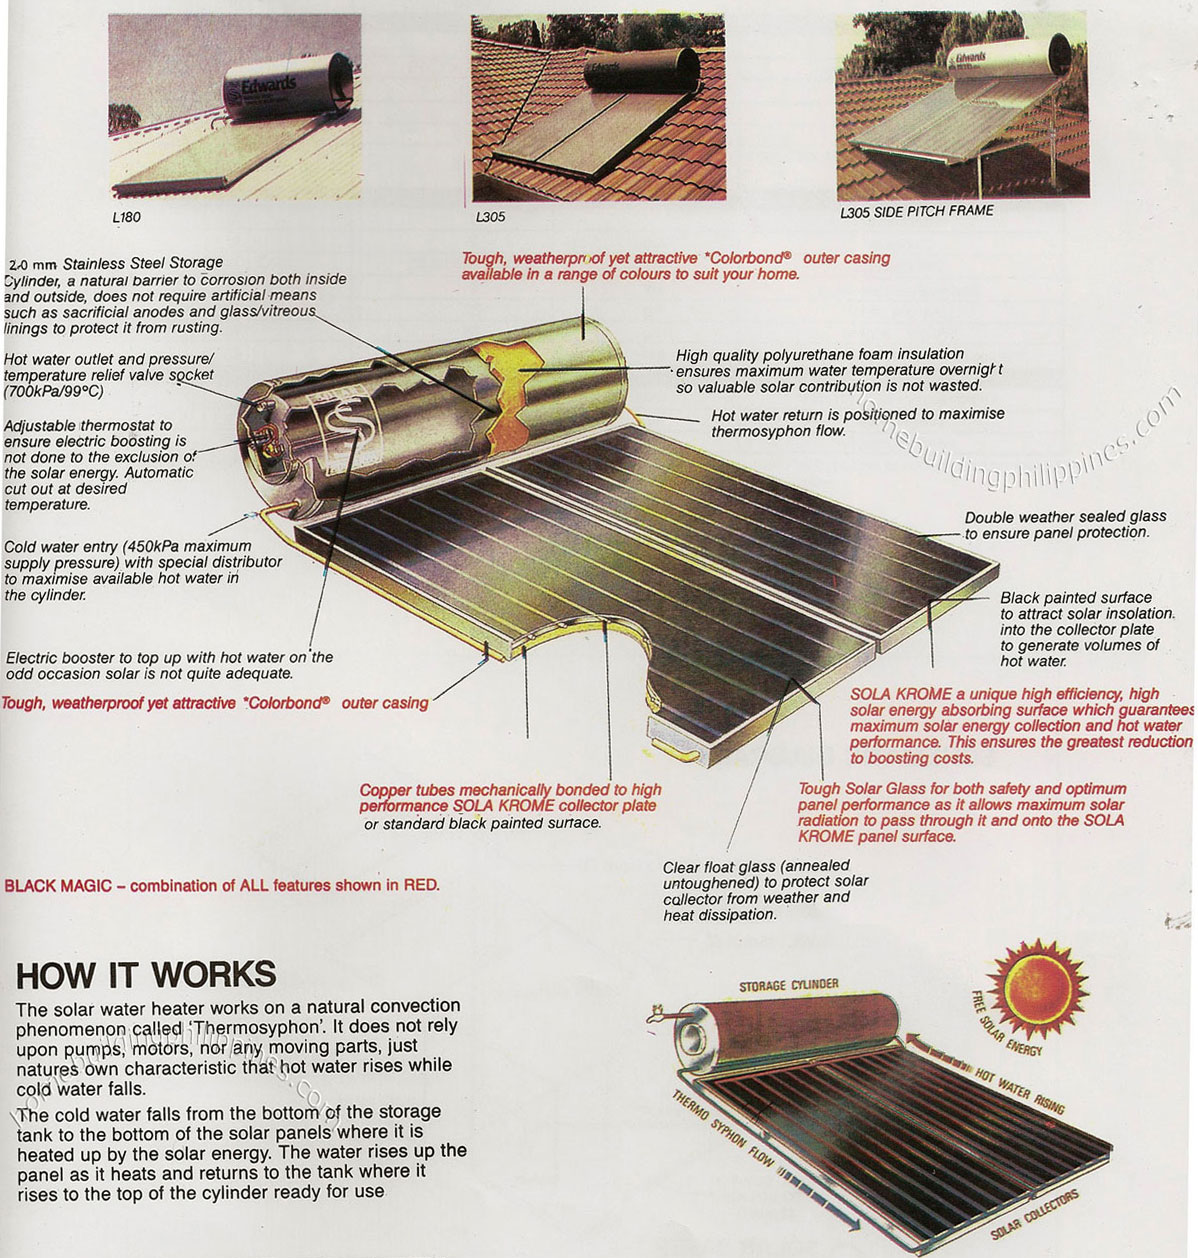 Solar Saver Water Heating System - How It Works